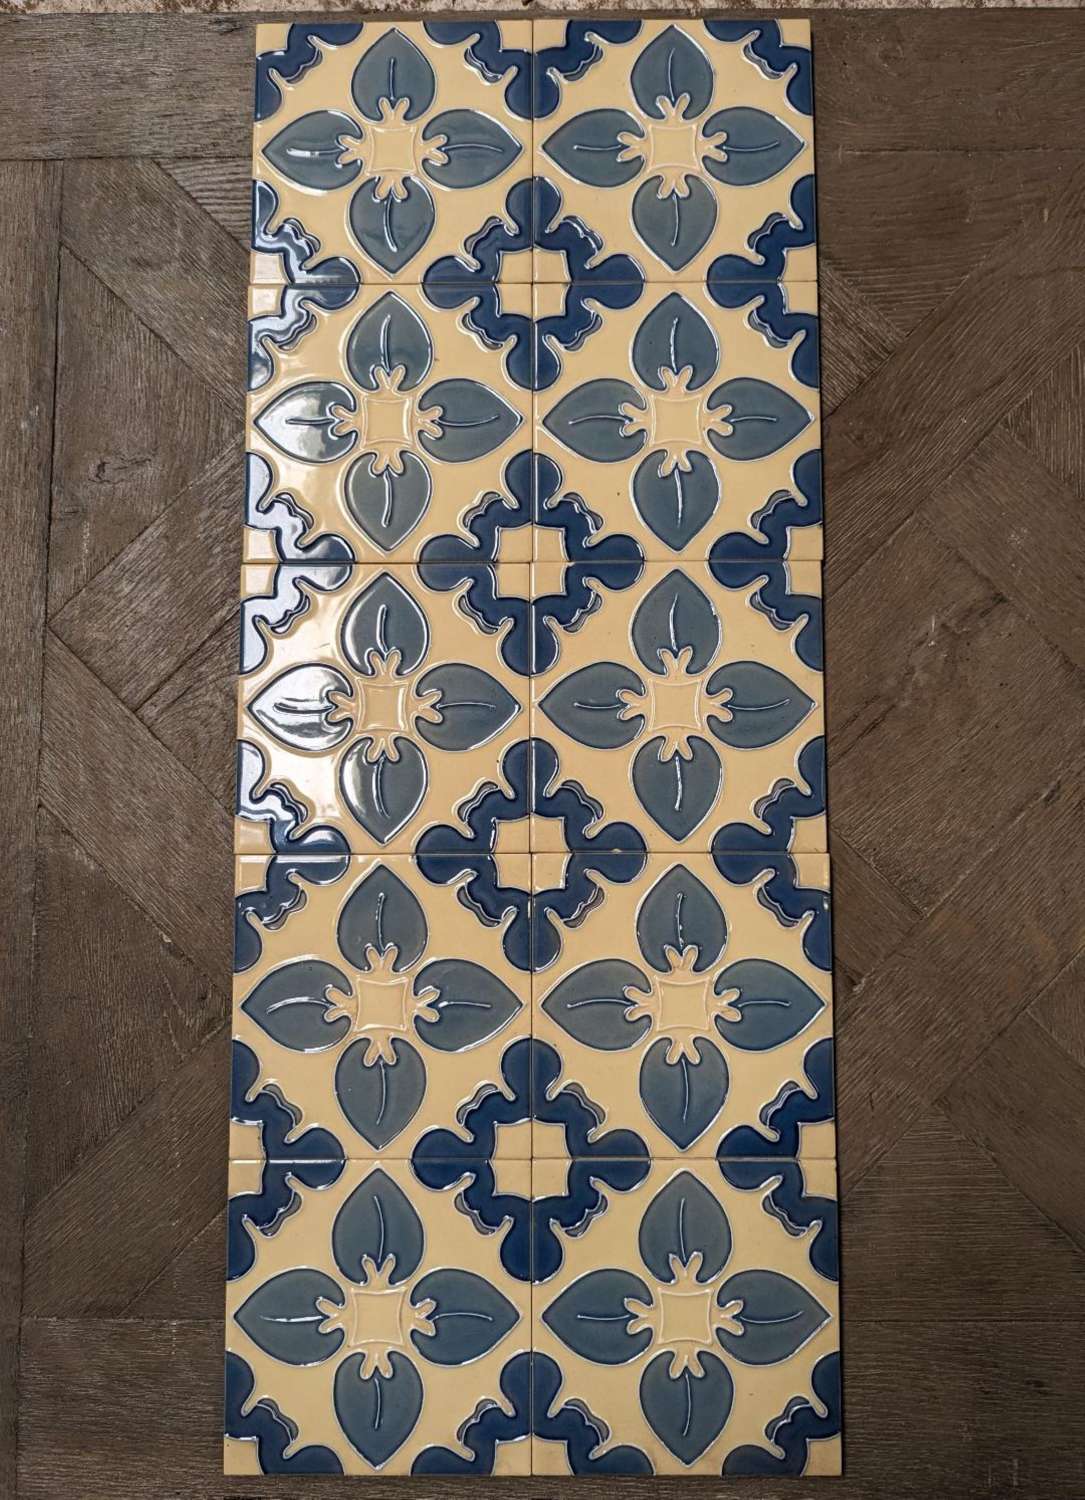 M1898 10 DECORATIVE REPRODUCTION UNUSED BLUE AND CREAM FIRE TILES